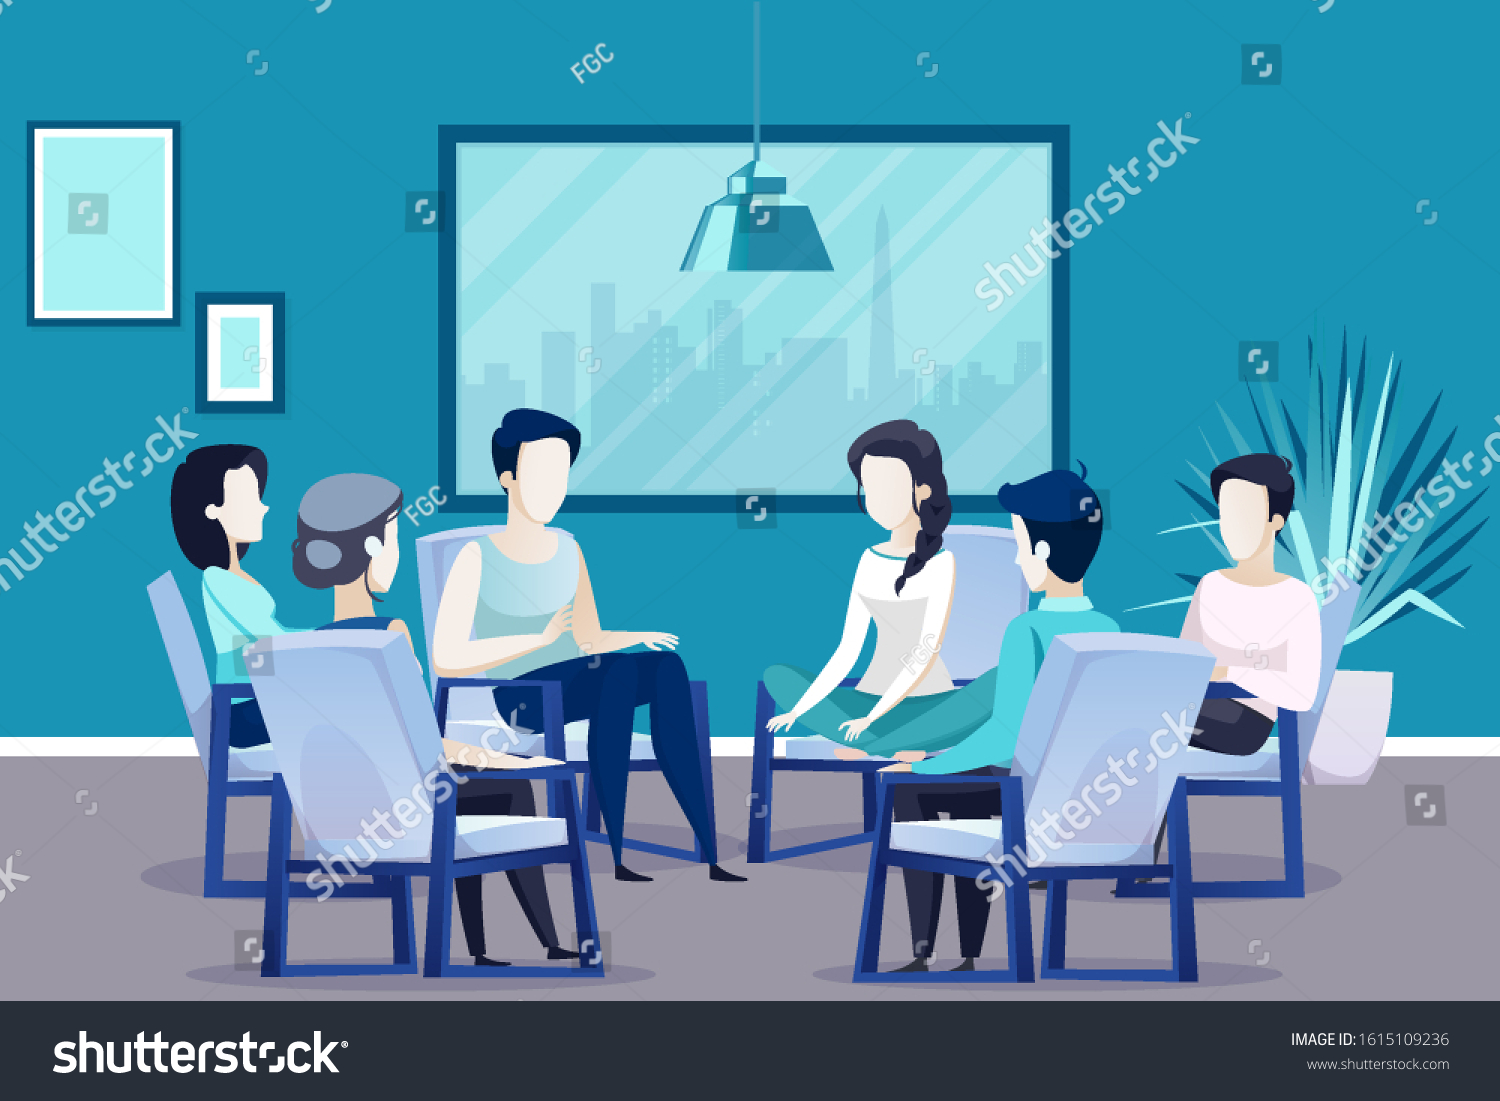 SVG of Group therapy concept. Vector of people sitting on chairs arranged in a circle discussing psychological problems being counseled  svg